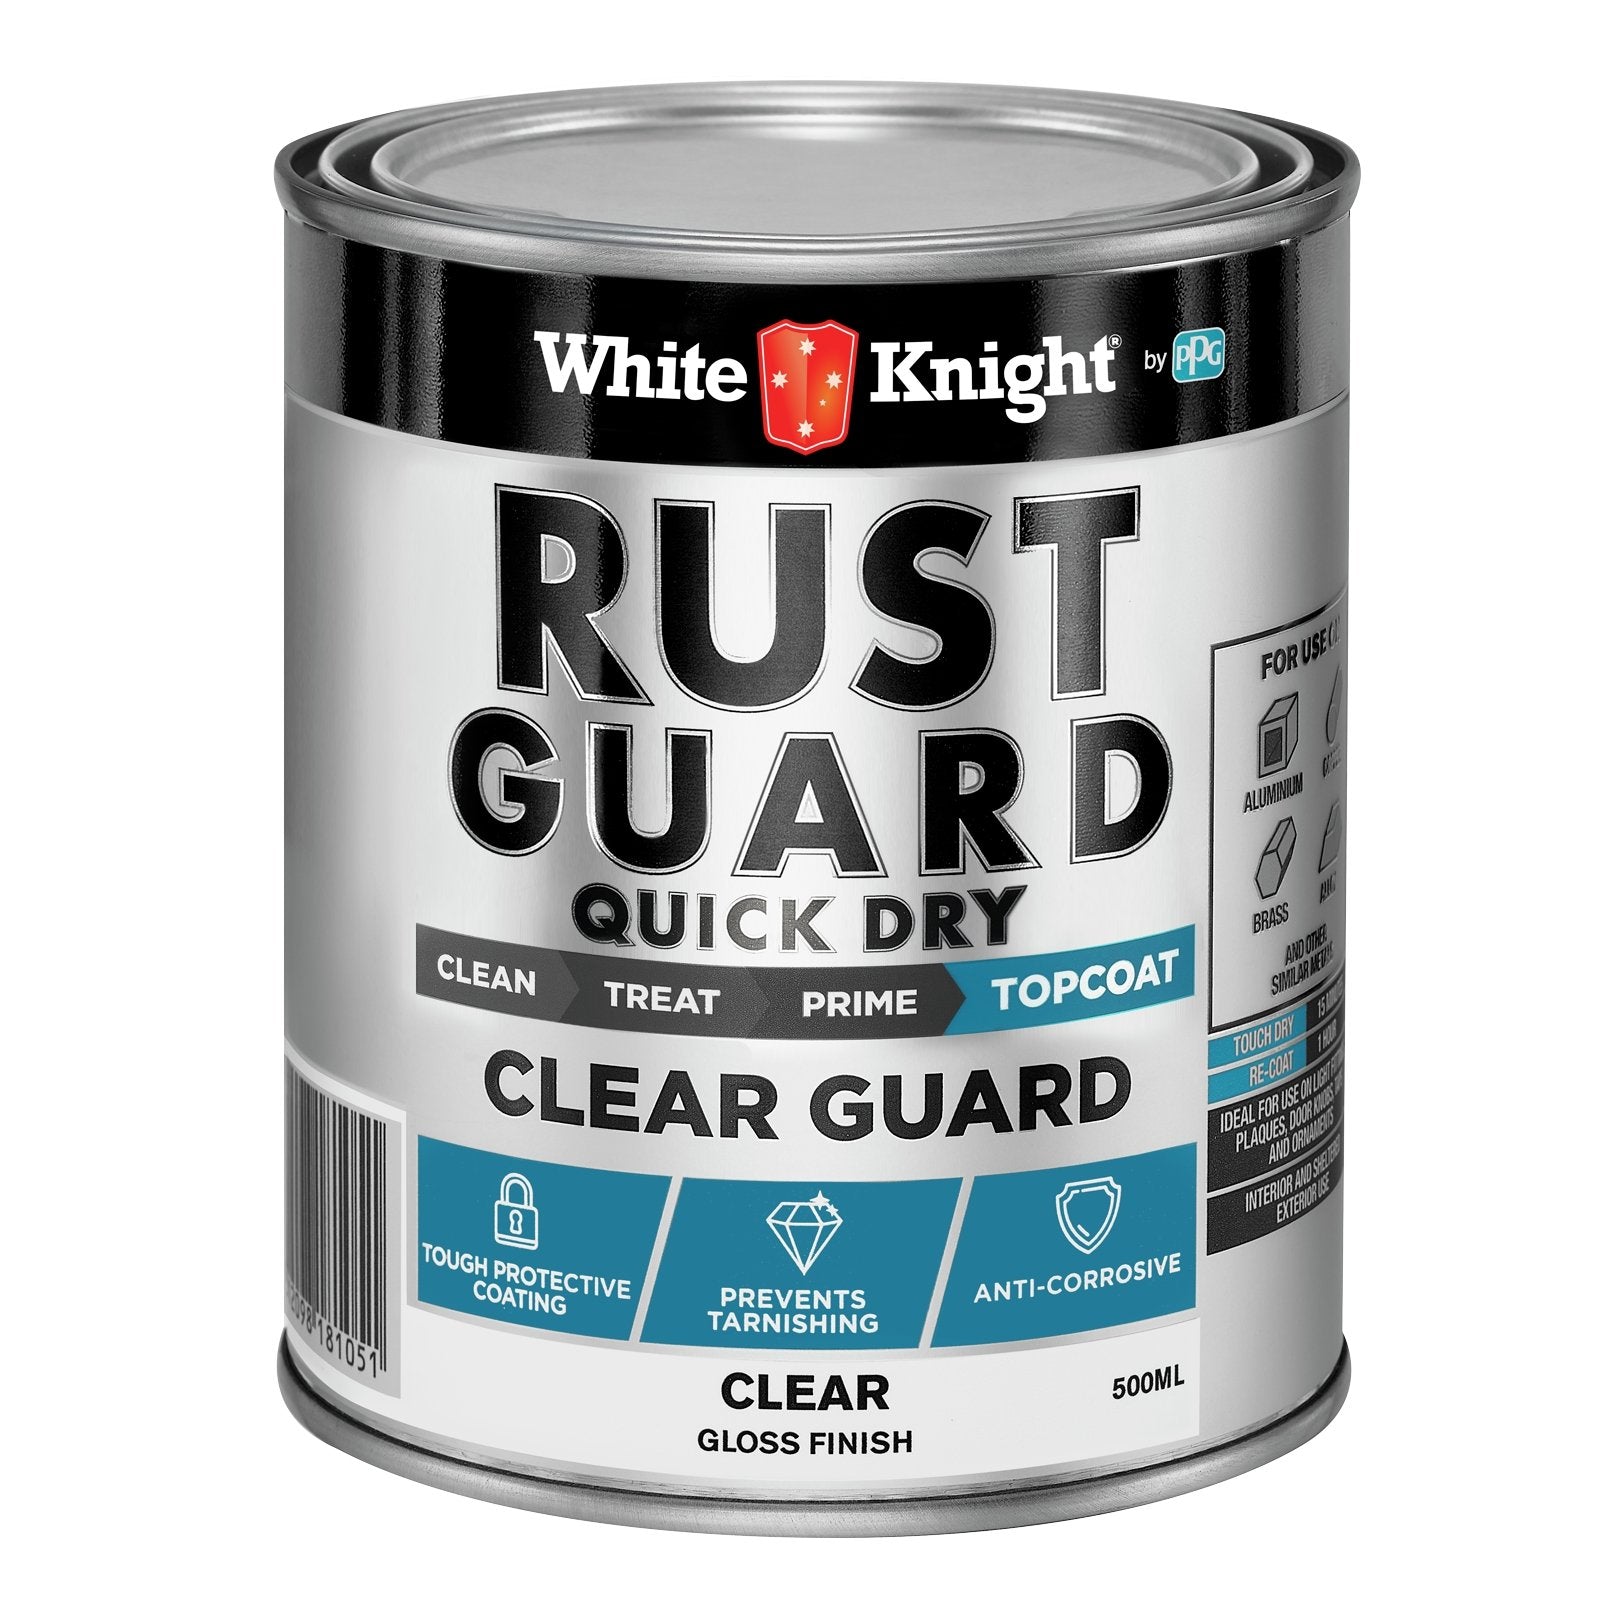 White Knight Rust Guard Clear Quick Dry Topcoat Paint 500ml 375633/500ML - Double Bay Hardware